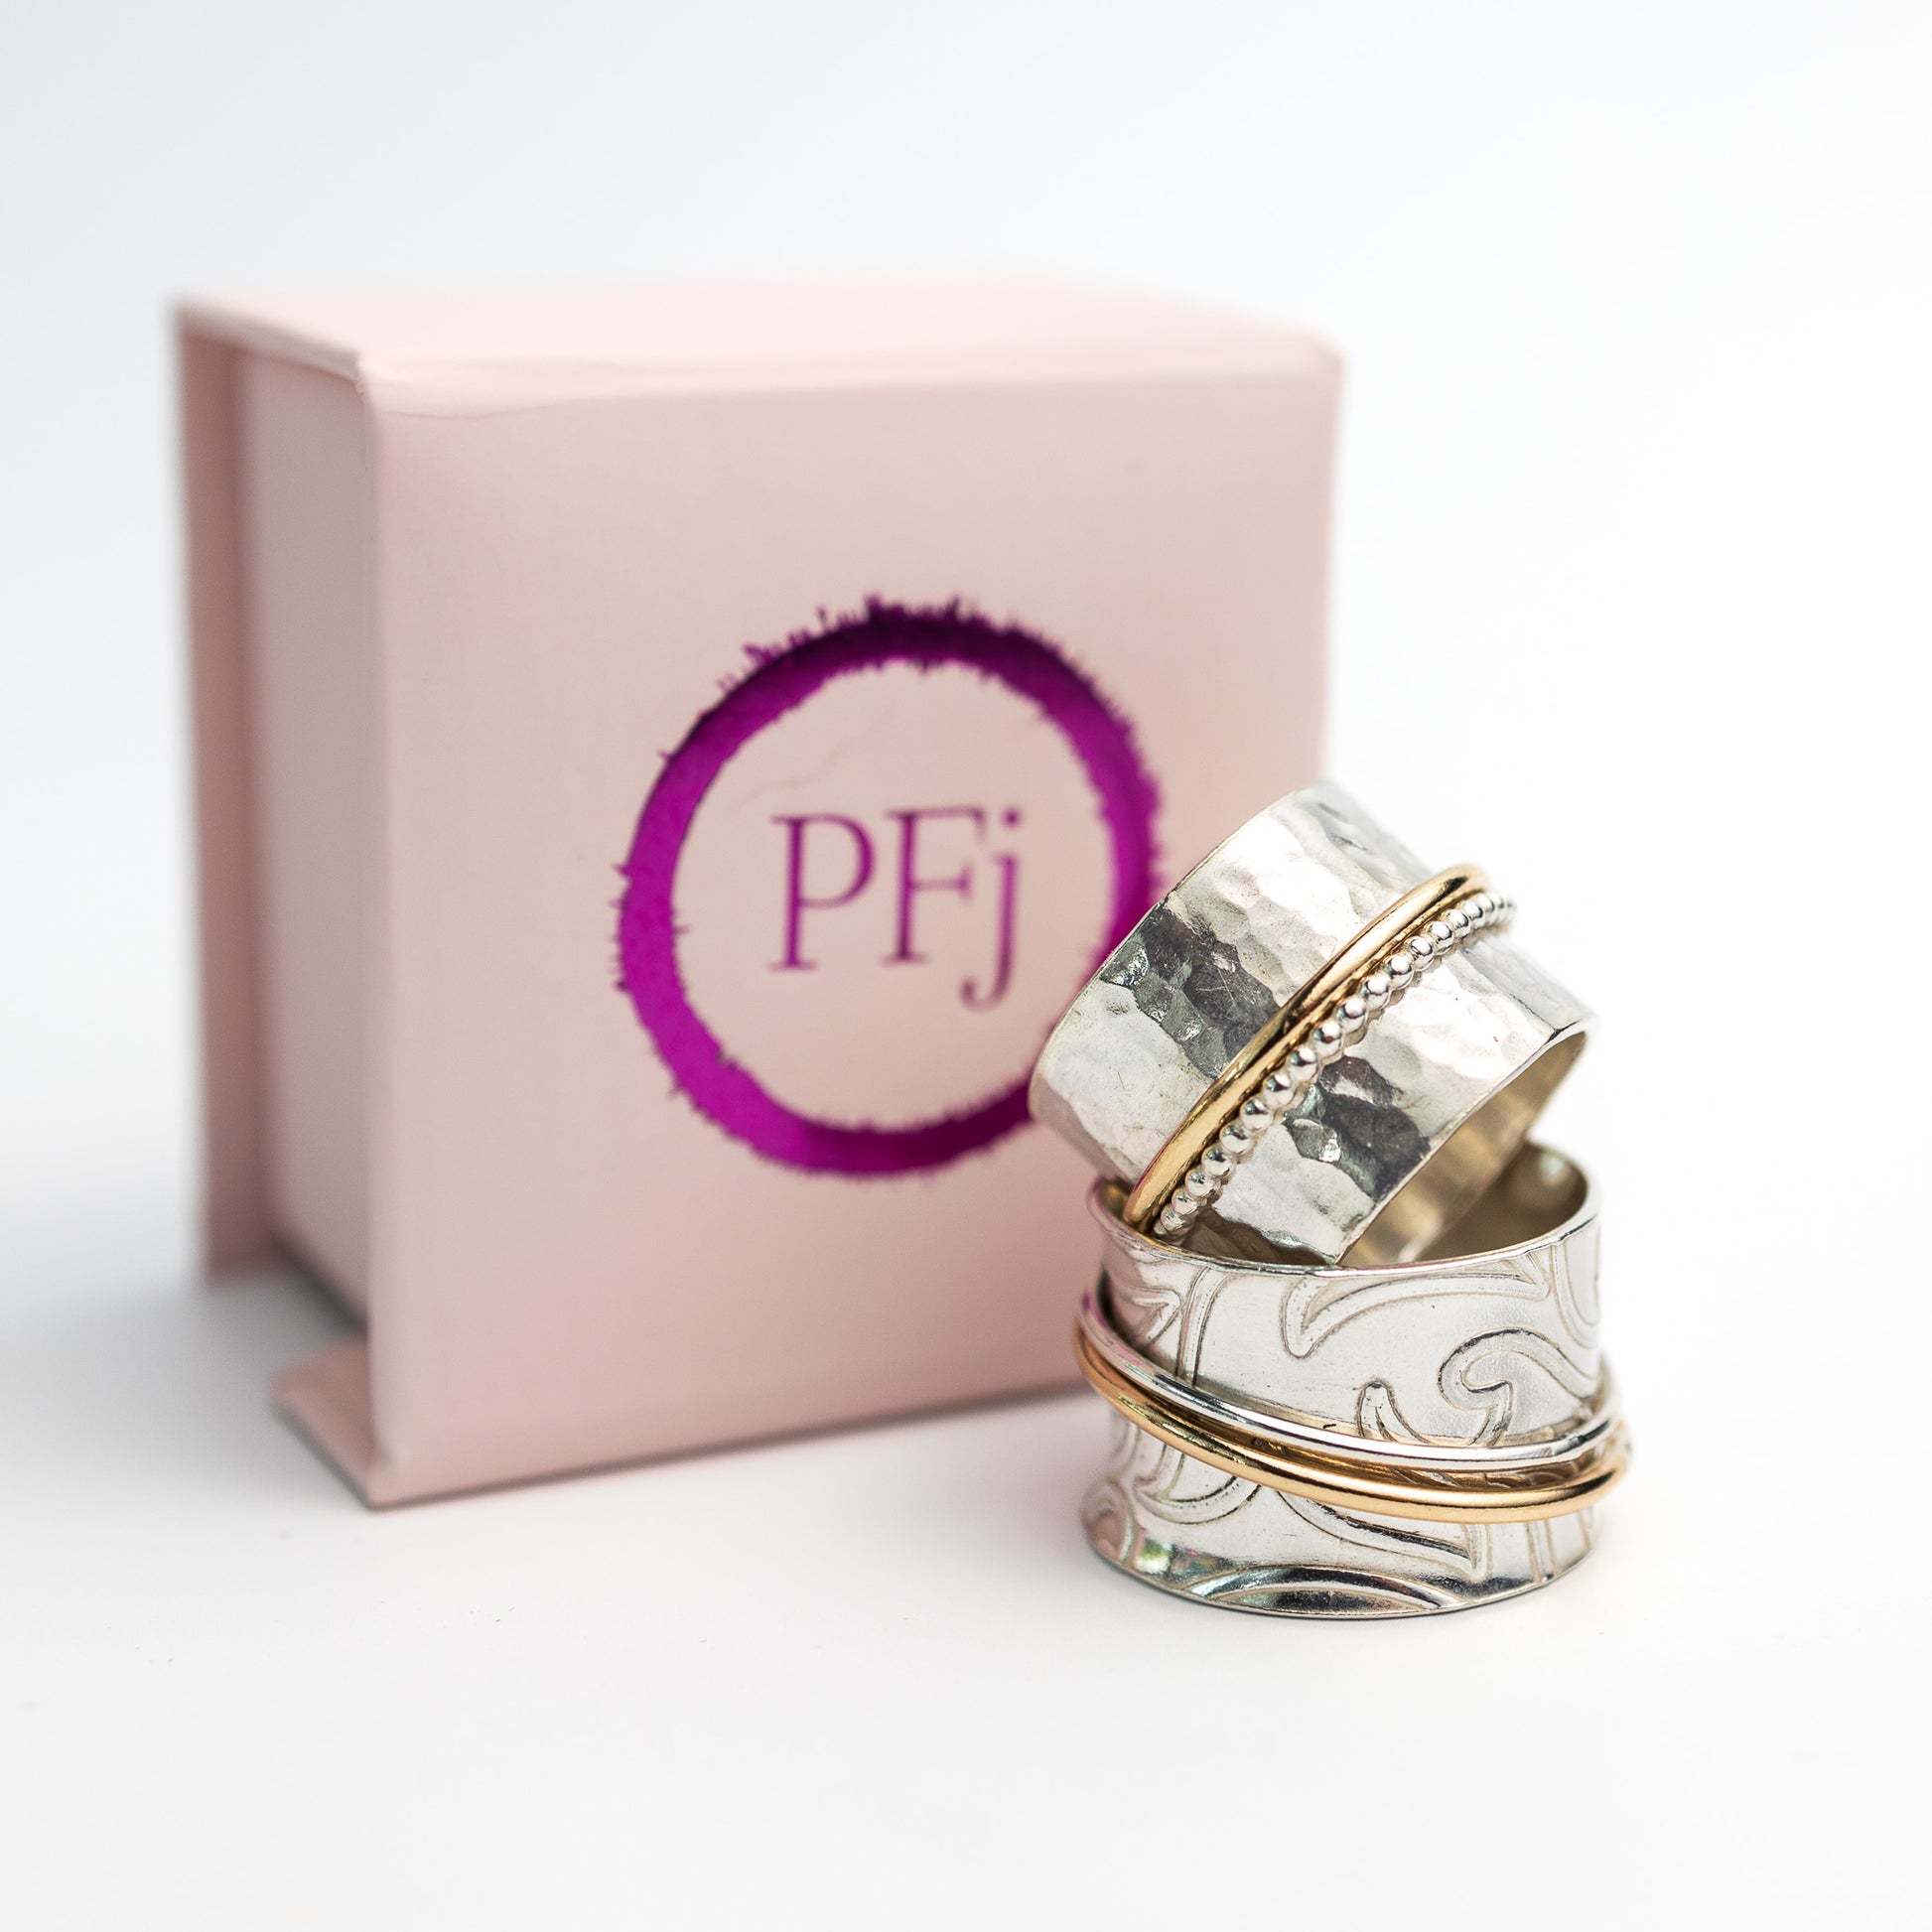 sterling silver spinner ring embedded lotus flower pattern finished beaded outer ring and gold filled outer ring pictured here with the presentation box pink with pfj logo